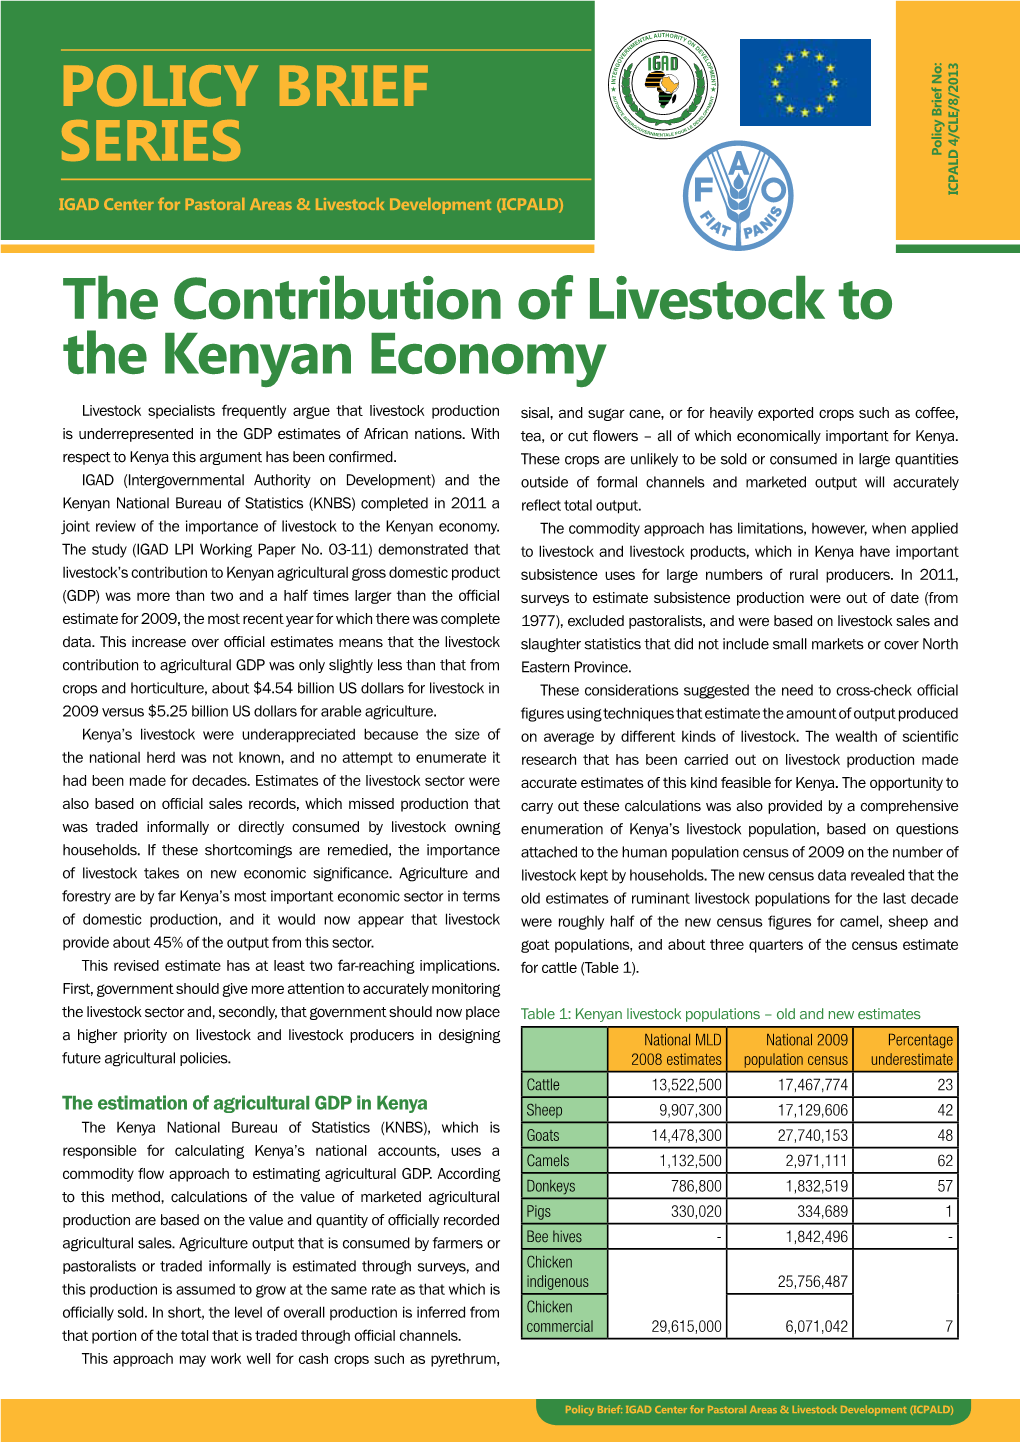 The Contribution of Livestock to the Kenyan Economy